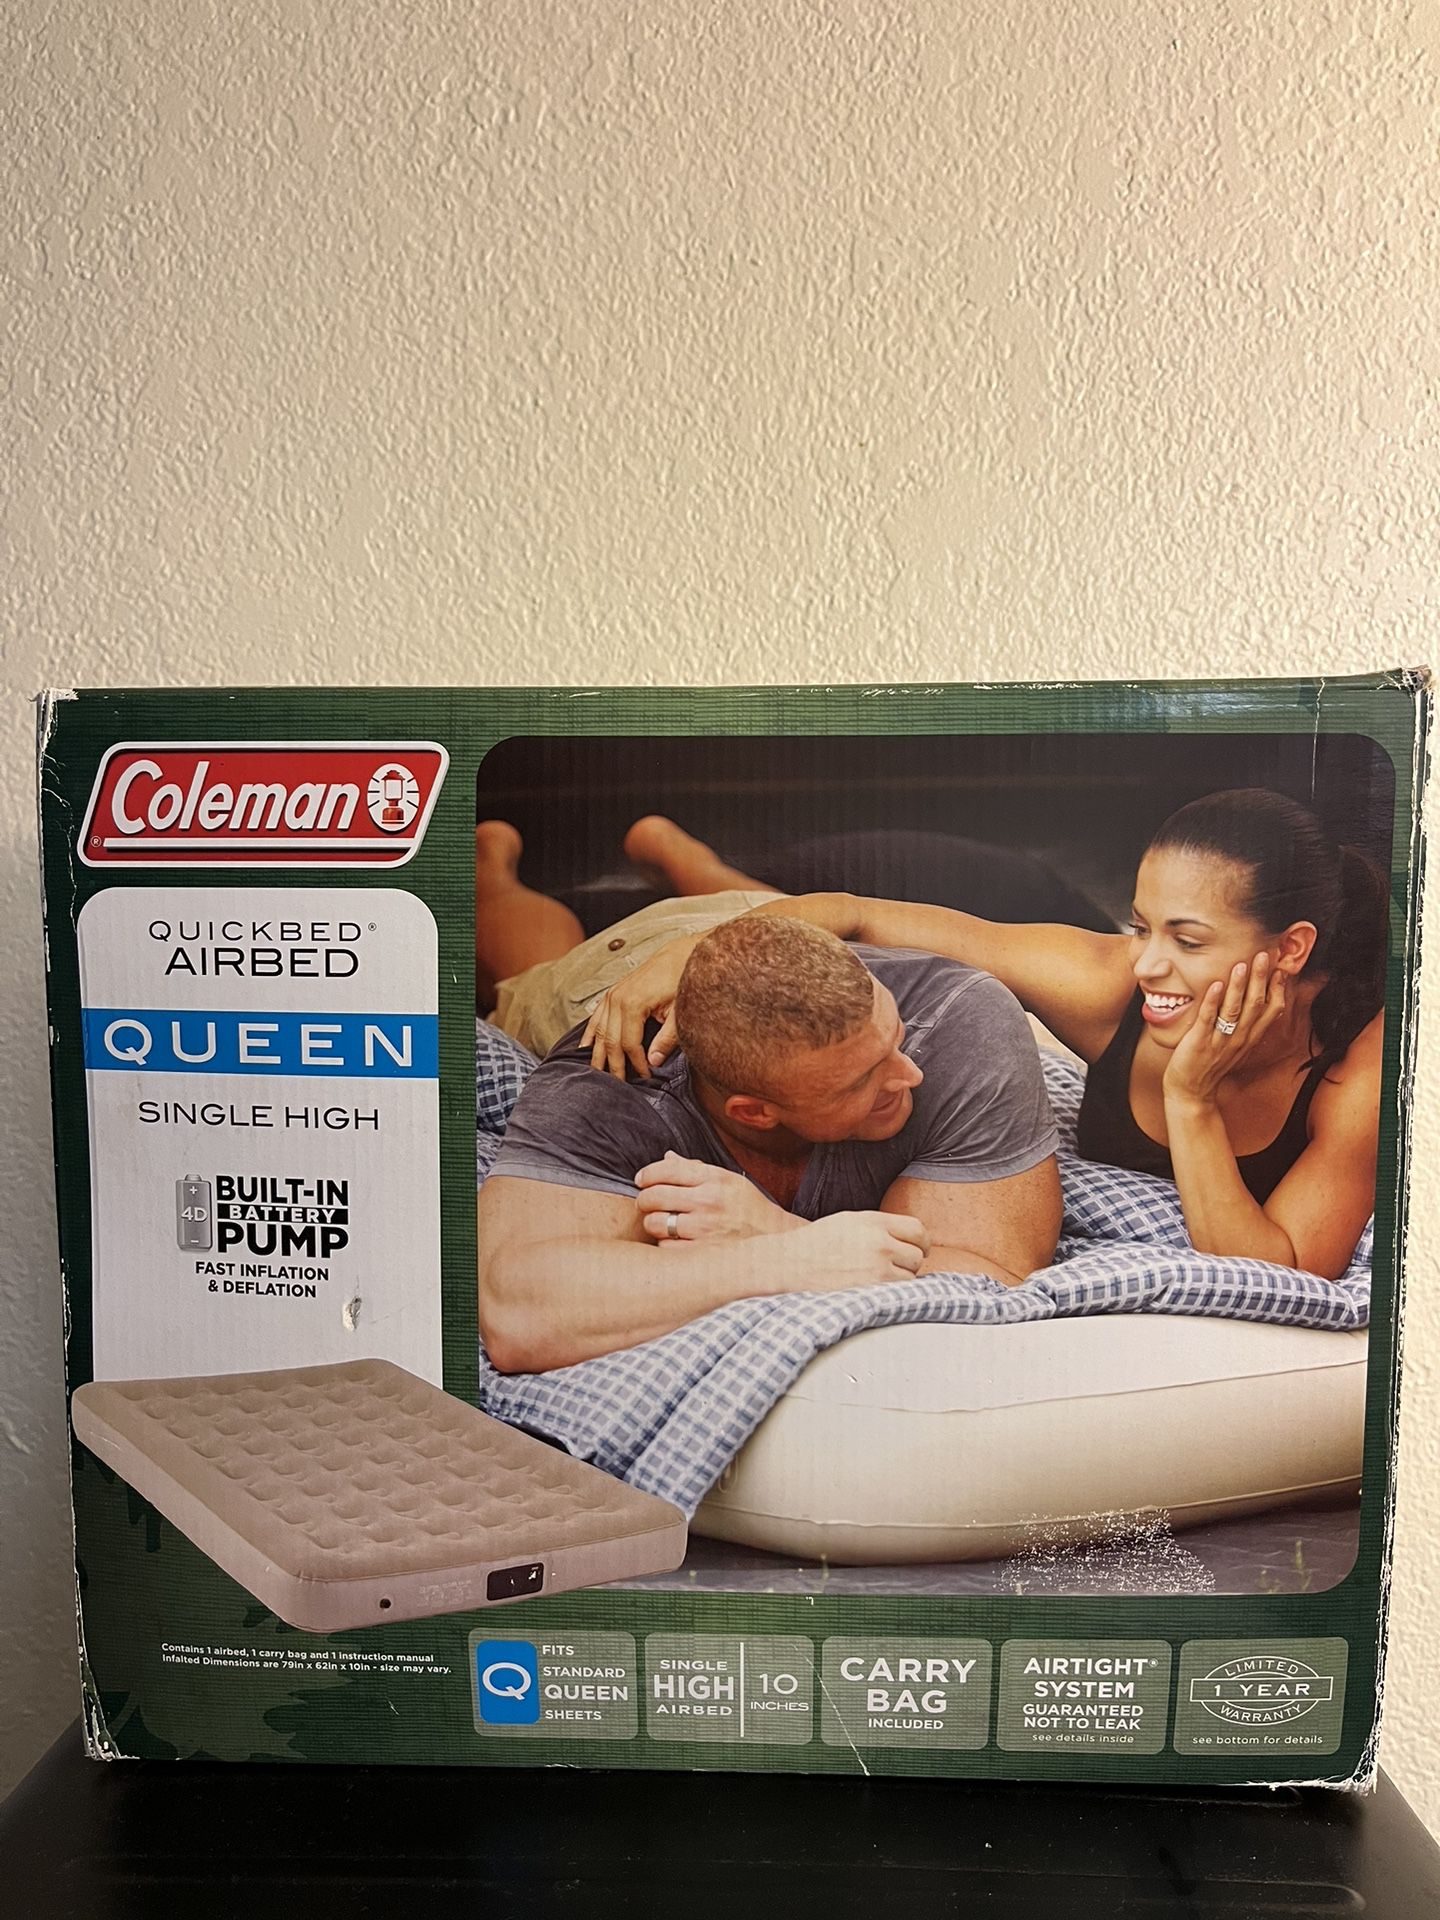 Coleman, Quick Bed Air Bed Queen, Single High Built-In Pump Comes With New Batteries.